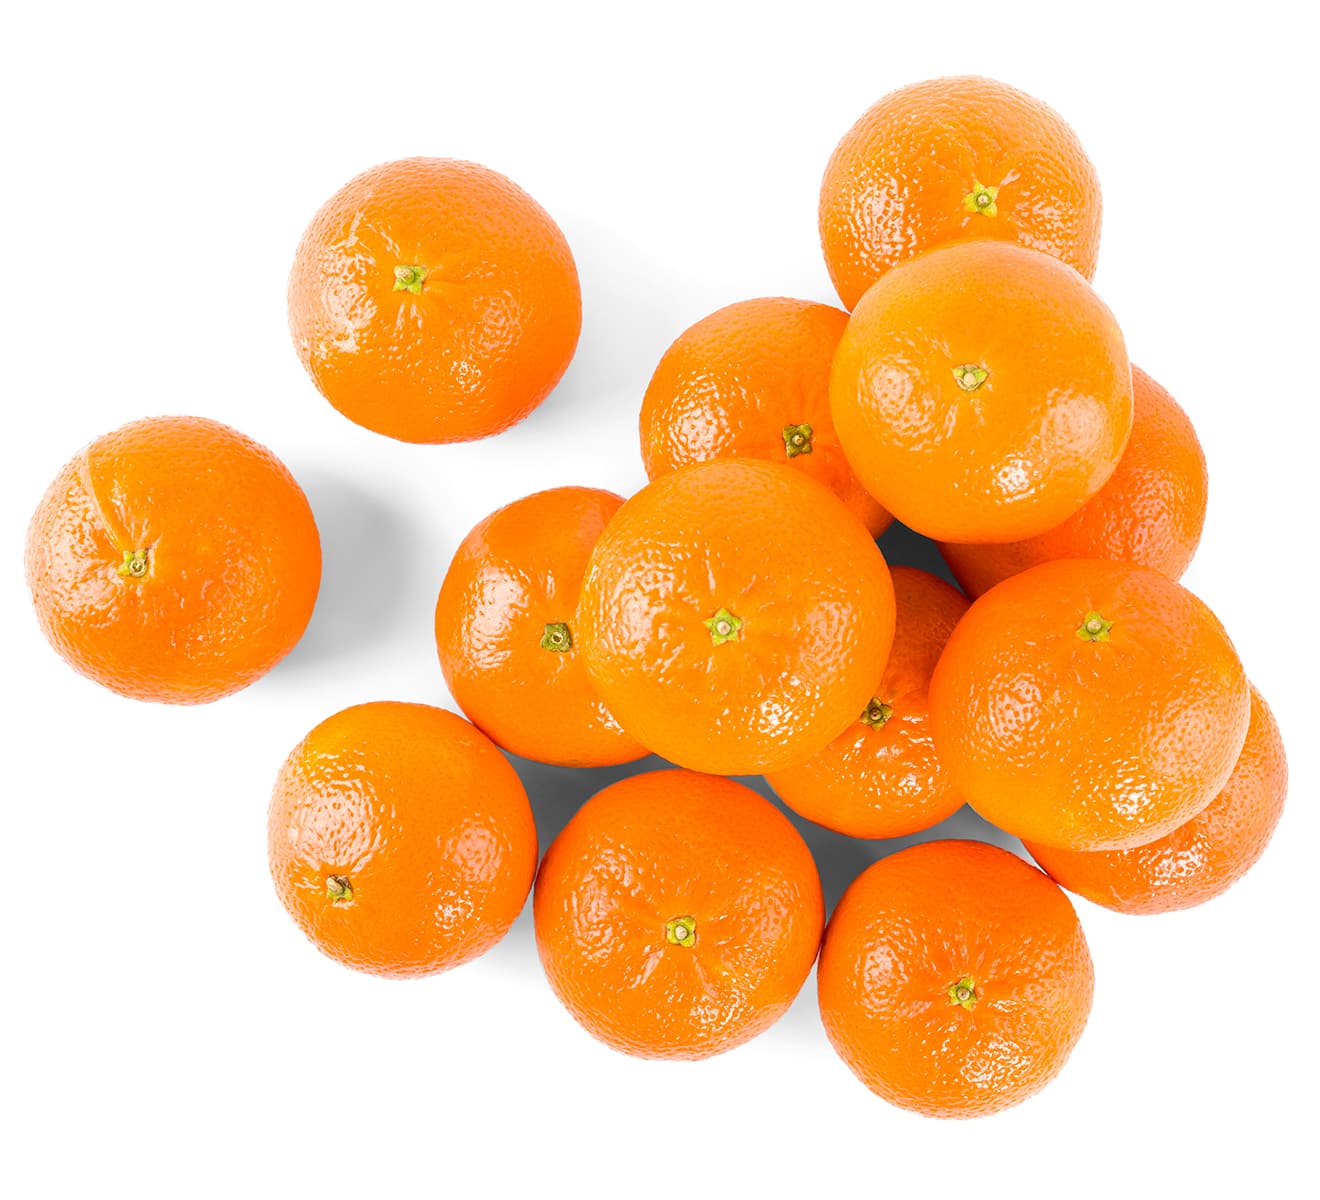 Photo of a group of clementines/mandarins.